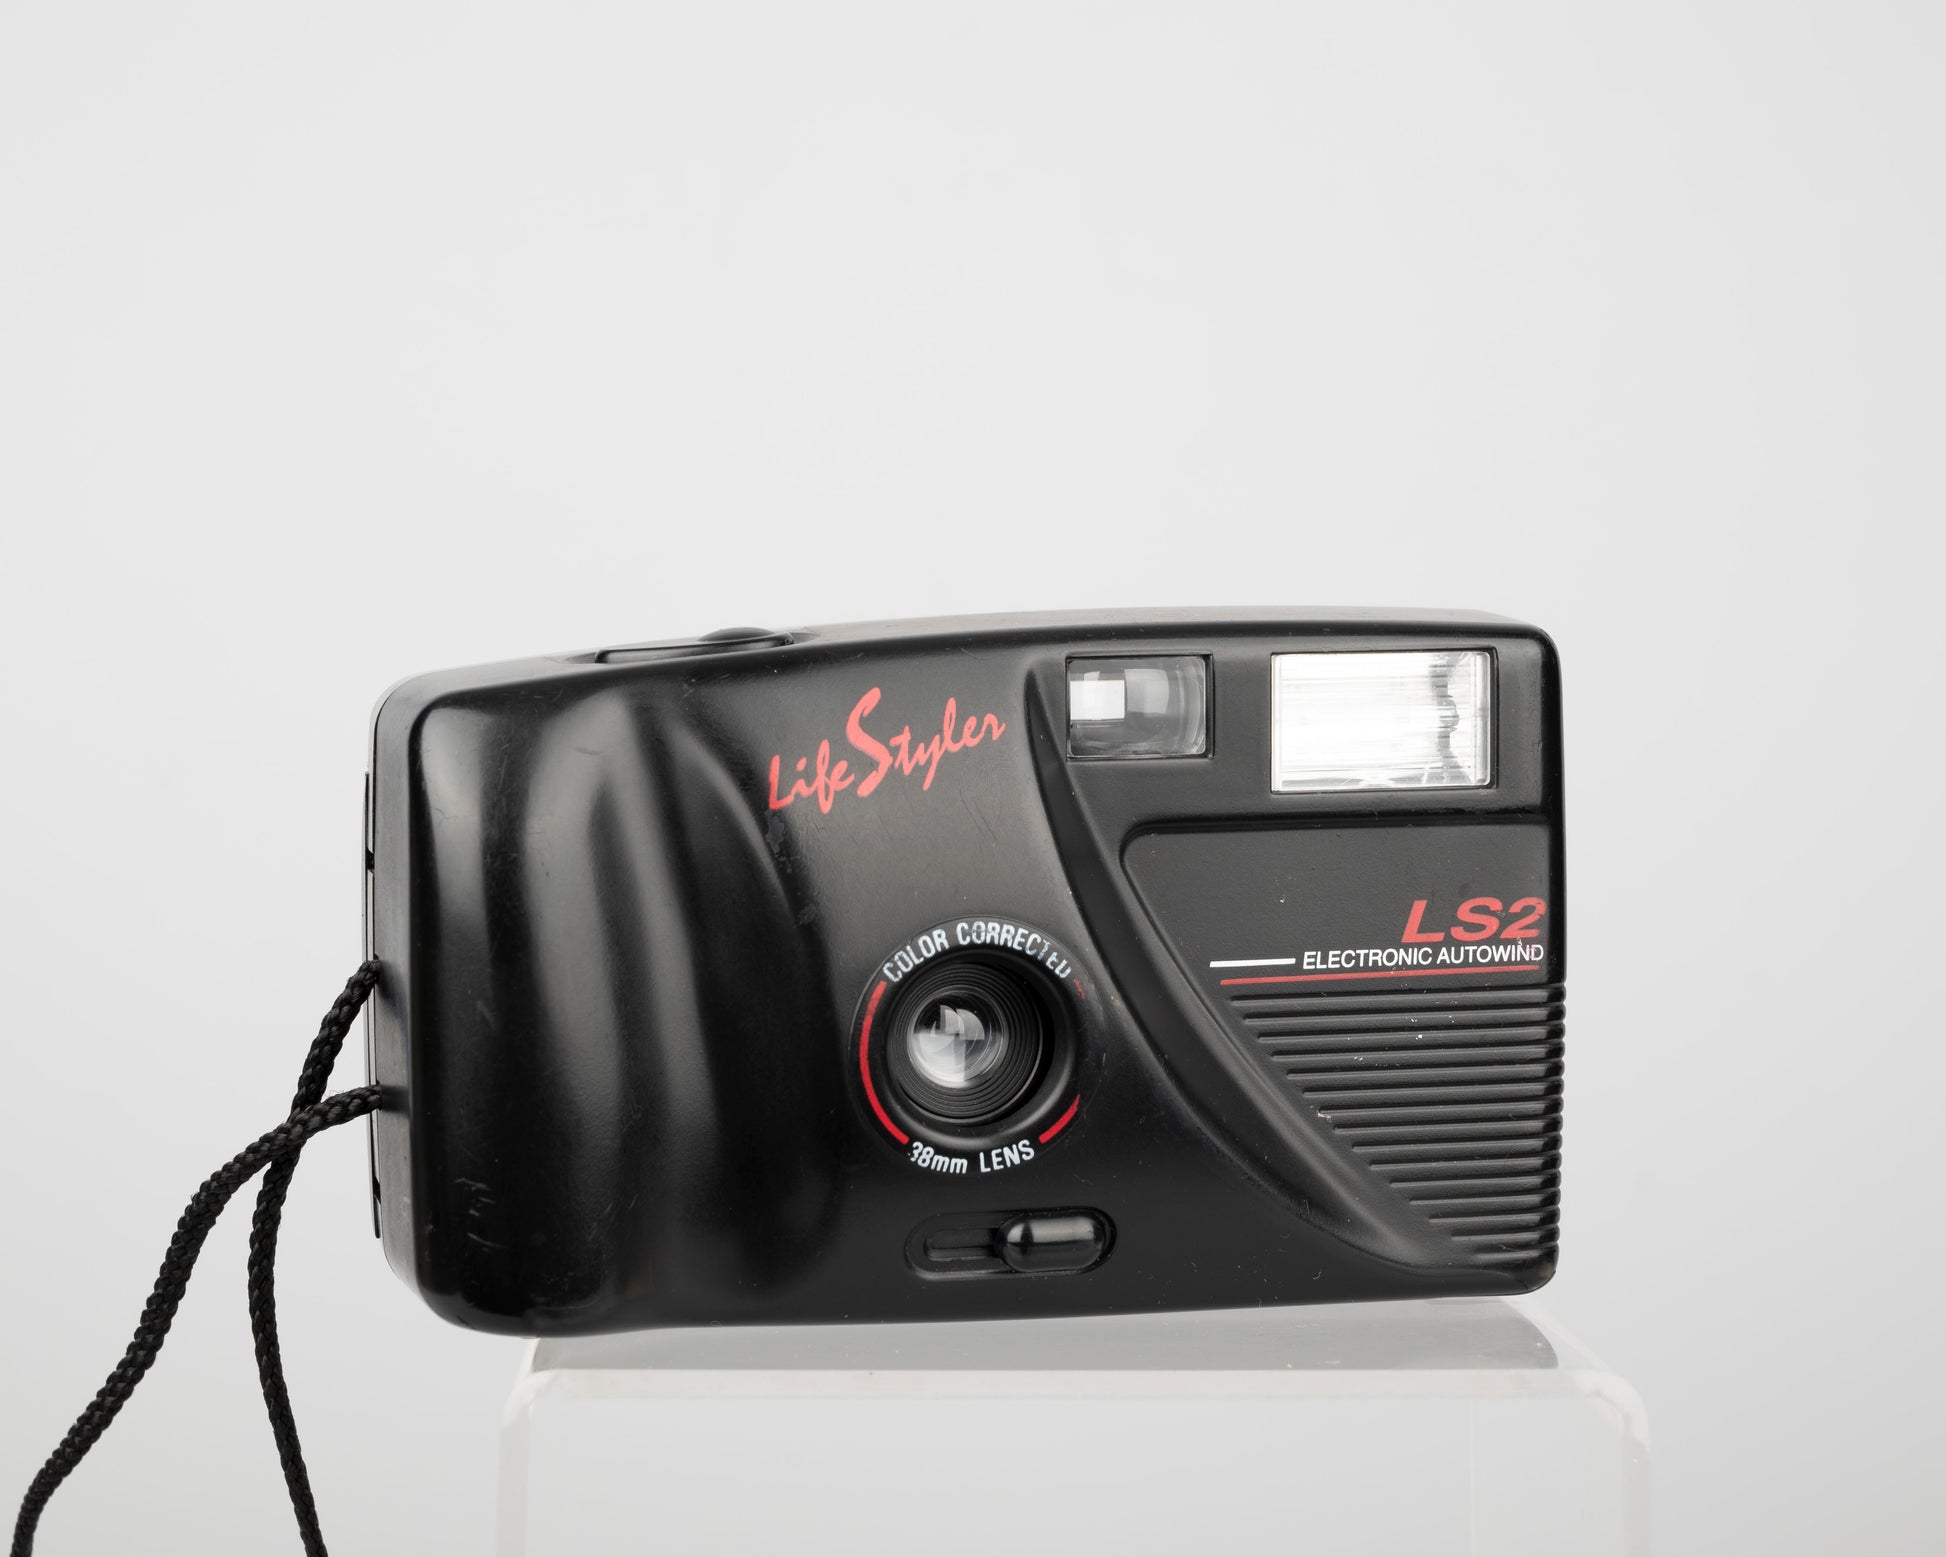 The LifeStyles SL2 Electronic Autowind is a basic 35mm point-and-shoot from the late 1980s